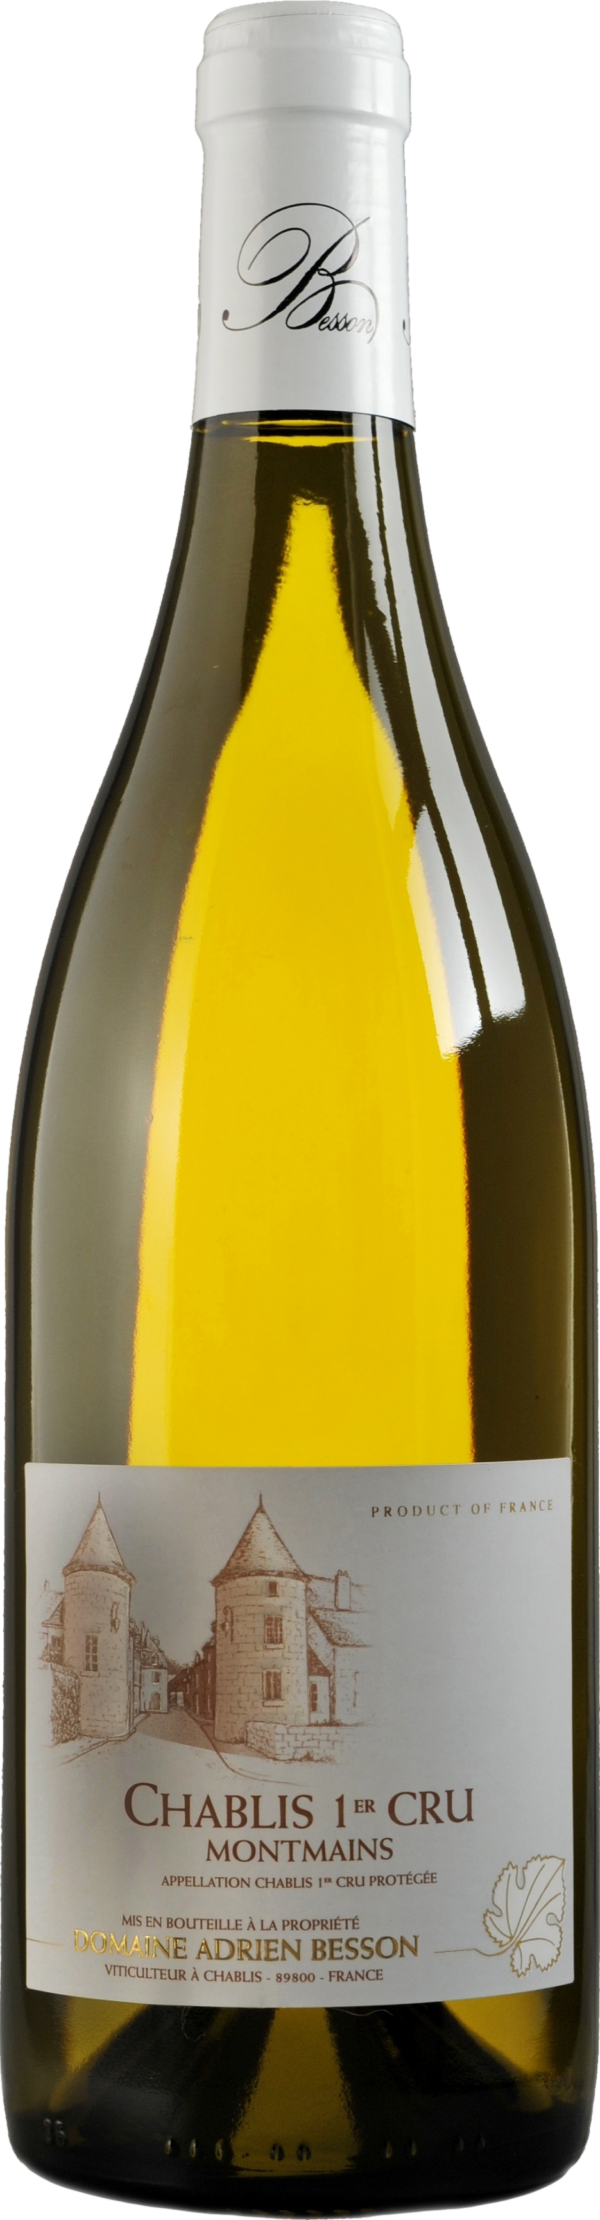 Product image of Domaine Besson Chablis Premier Cru Montmains 2021 from 8wines